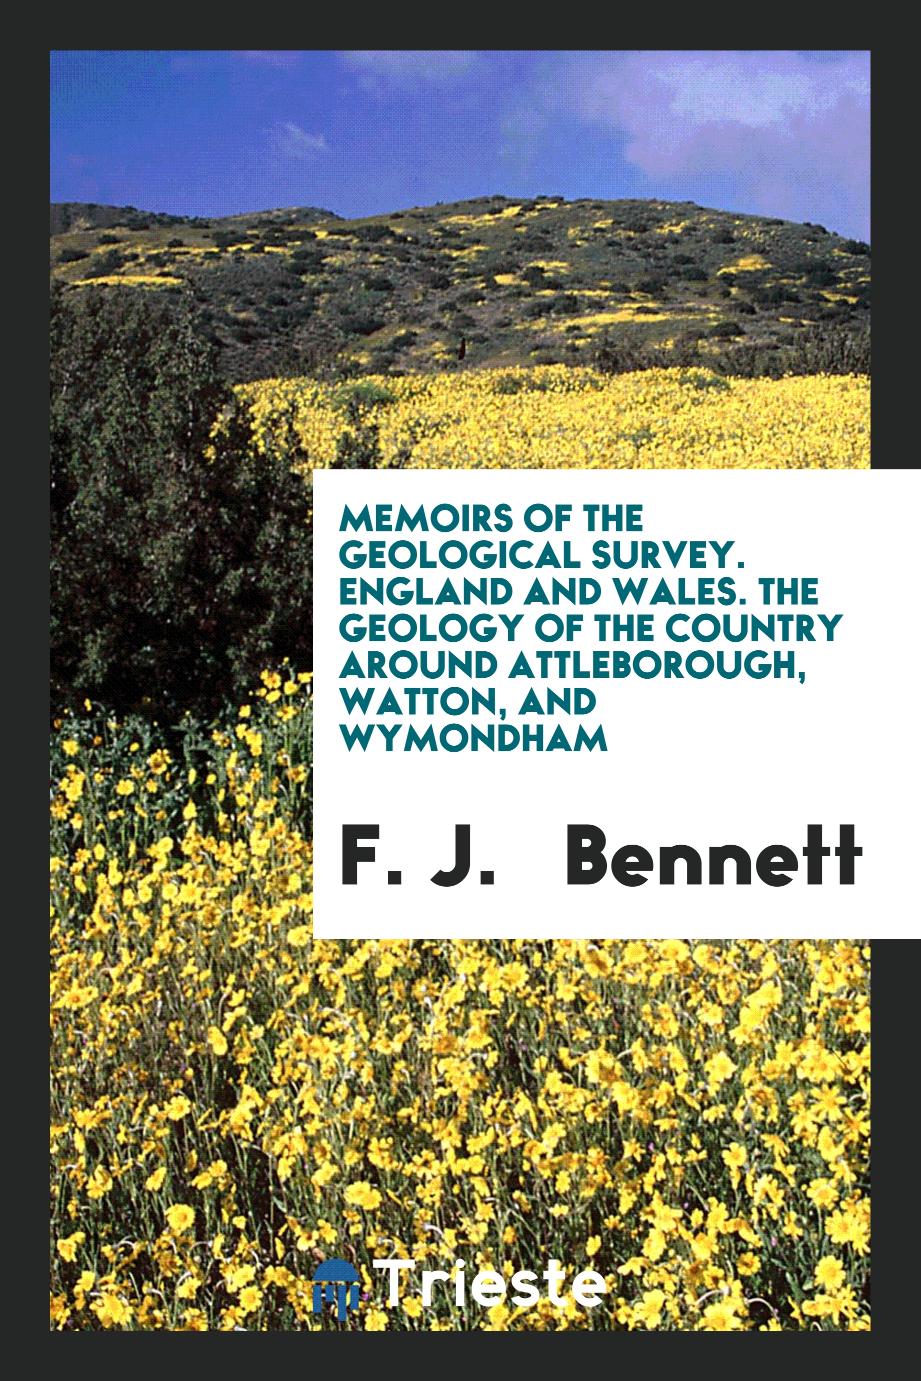 Memoirs of the geological survey. England and Wales. The Geology of the Country Around Attleborough, Watton, and Wymondham